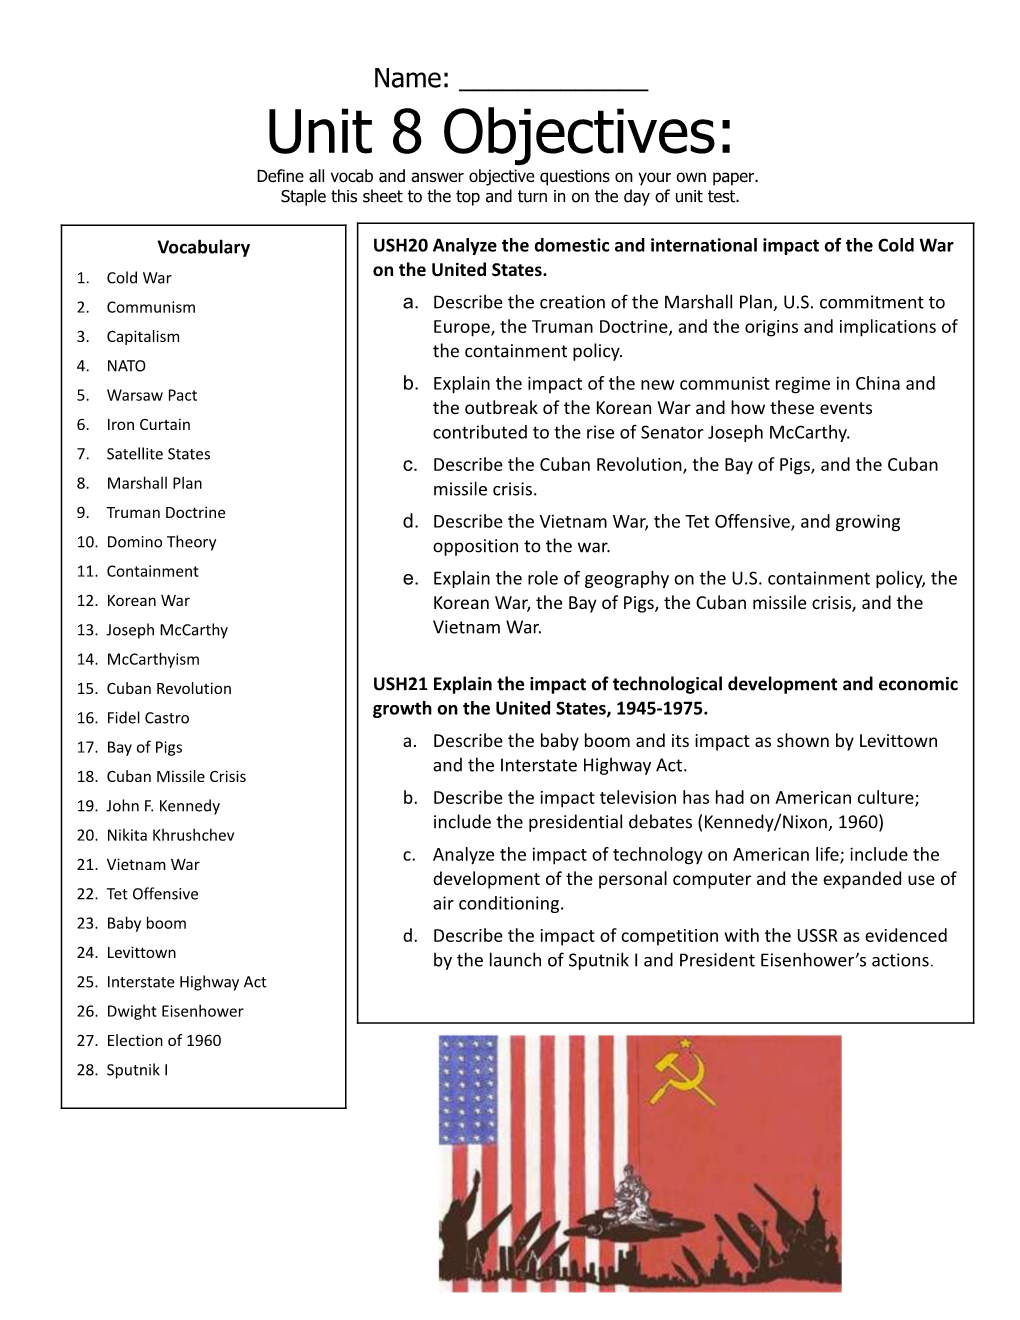 USHS 20: Analyze the Domestic and International Impact of the Cold War on the U.S